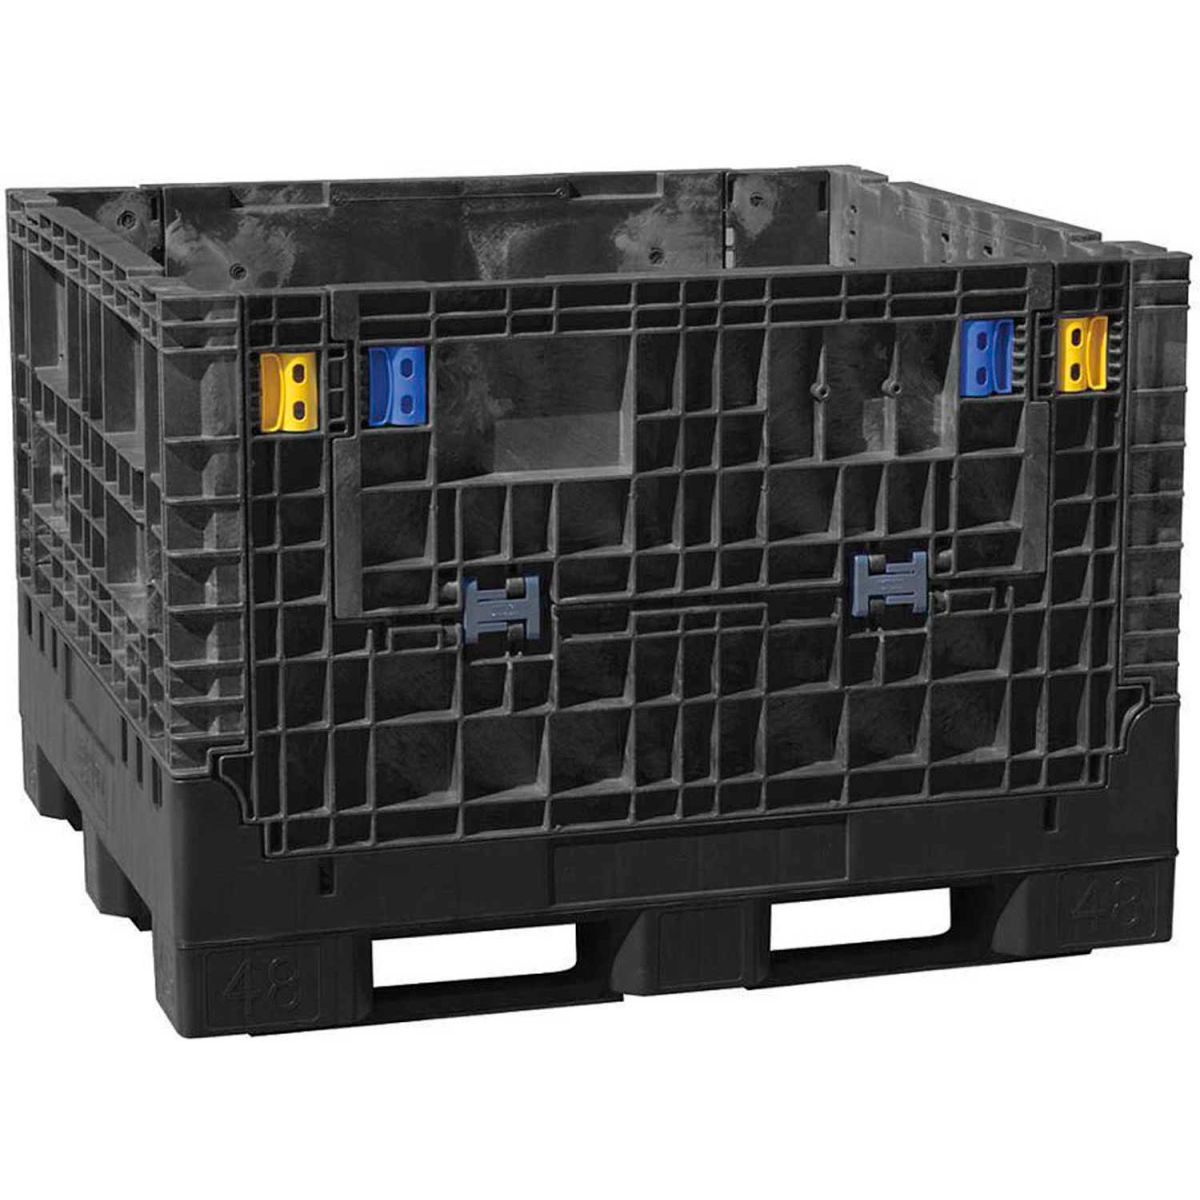 Picture of Akro-Mils 238333 2000 lbs Buckhorn Folding Bulk Shipping Container - Black - 48 x 45 x 50 in.